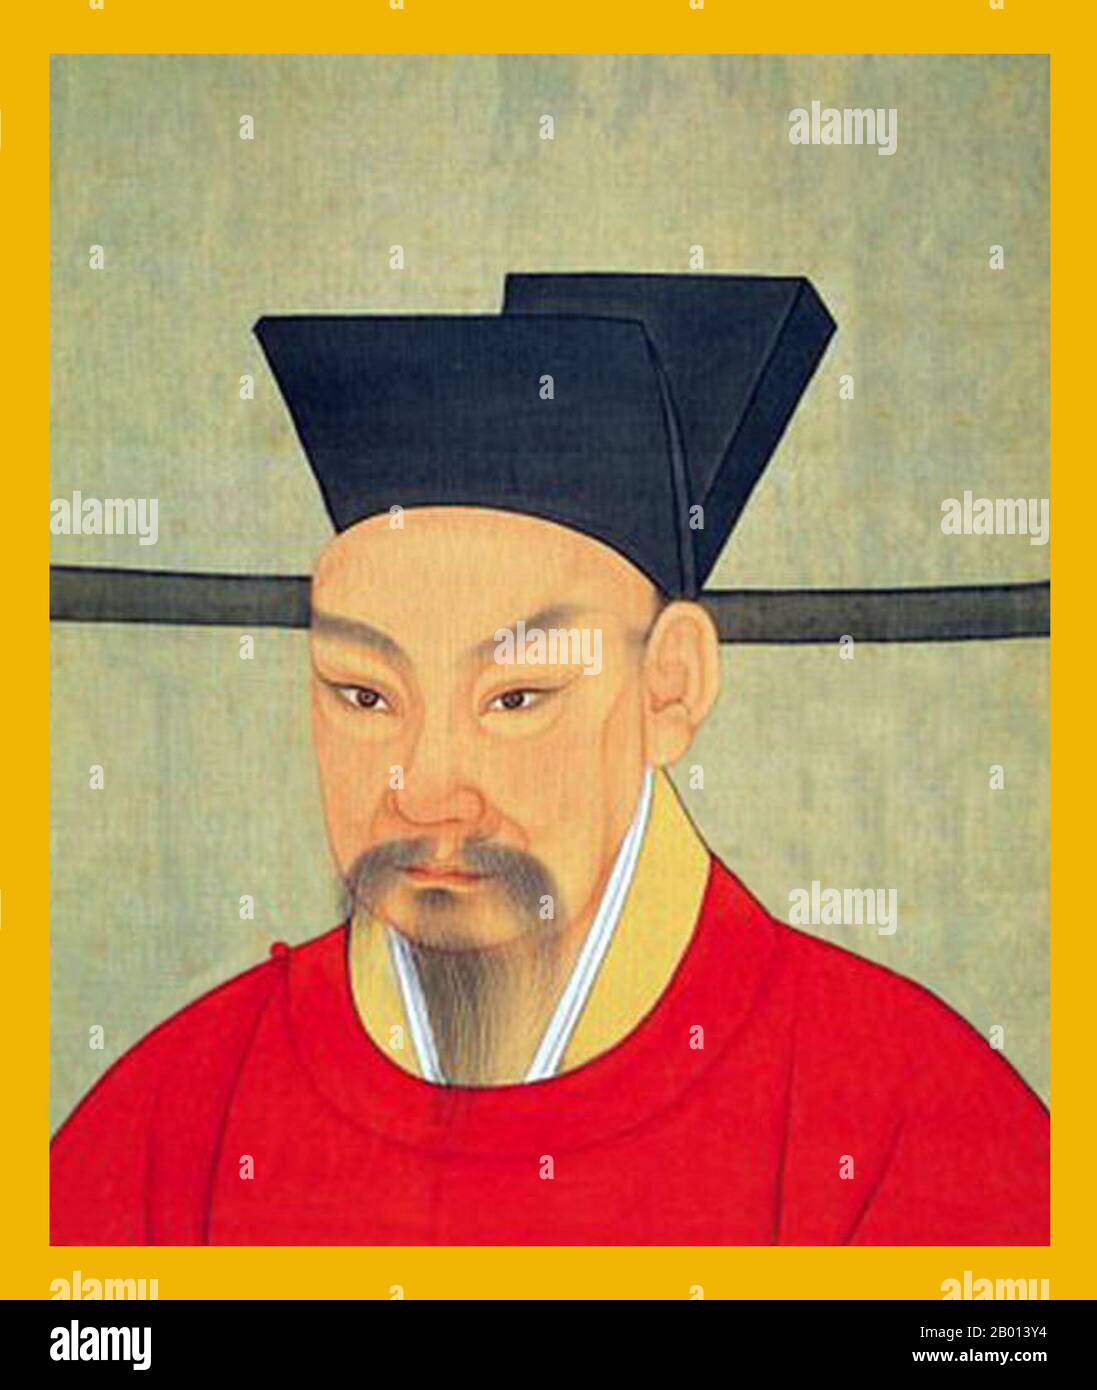 China: Emperor Lizong (26January 1205 - 16 November 1264), 14th ruler of the Song Dynasty and 5th ruler of the Southern Song (r. 1224-1264). Hanging scroll painting, c. 1224-1264.  Emperor Lizong, personal name Zhao Yun and originally known as Zhao Yuju and Zhao Guicheng, was the fifth emperor of the Southern Song. Lizong's long reign of forty years did little to improve the predicament Song China was in at the time. Lizong was uninterested in governmental affairs, delegating matters into the hands of his ministers while he chased after frivolous pleasures, even as the Mongols approached. Stock Photo